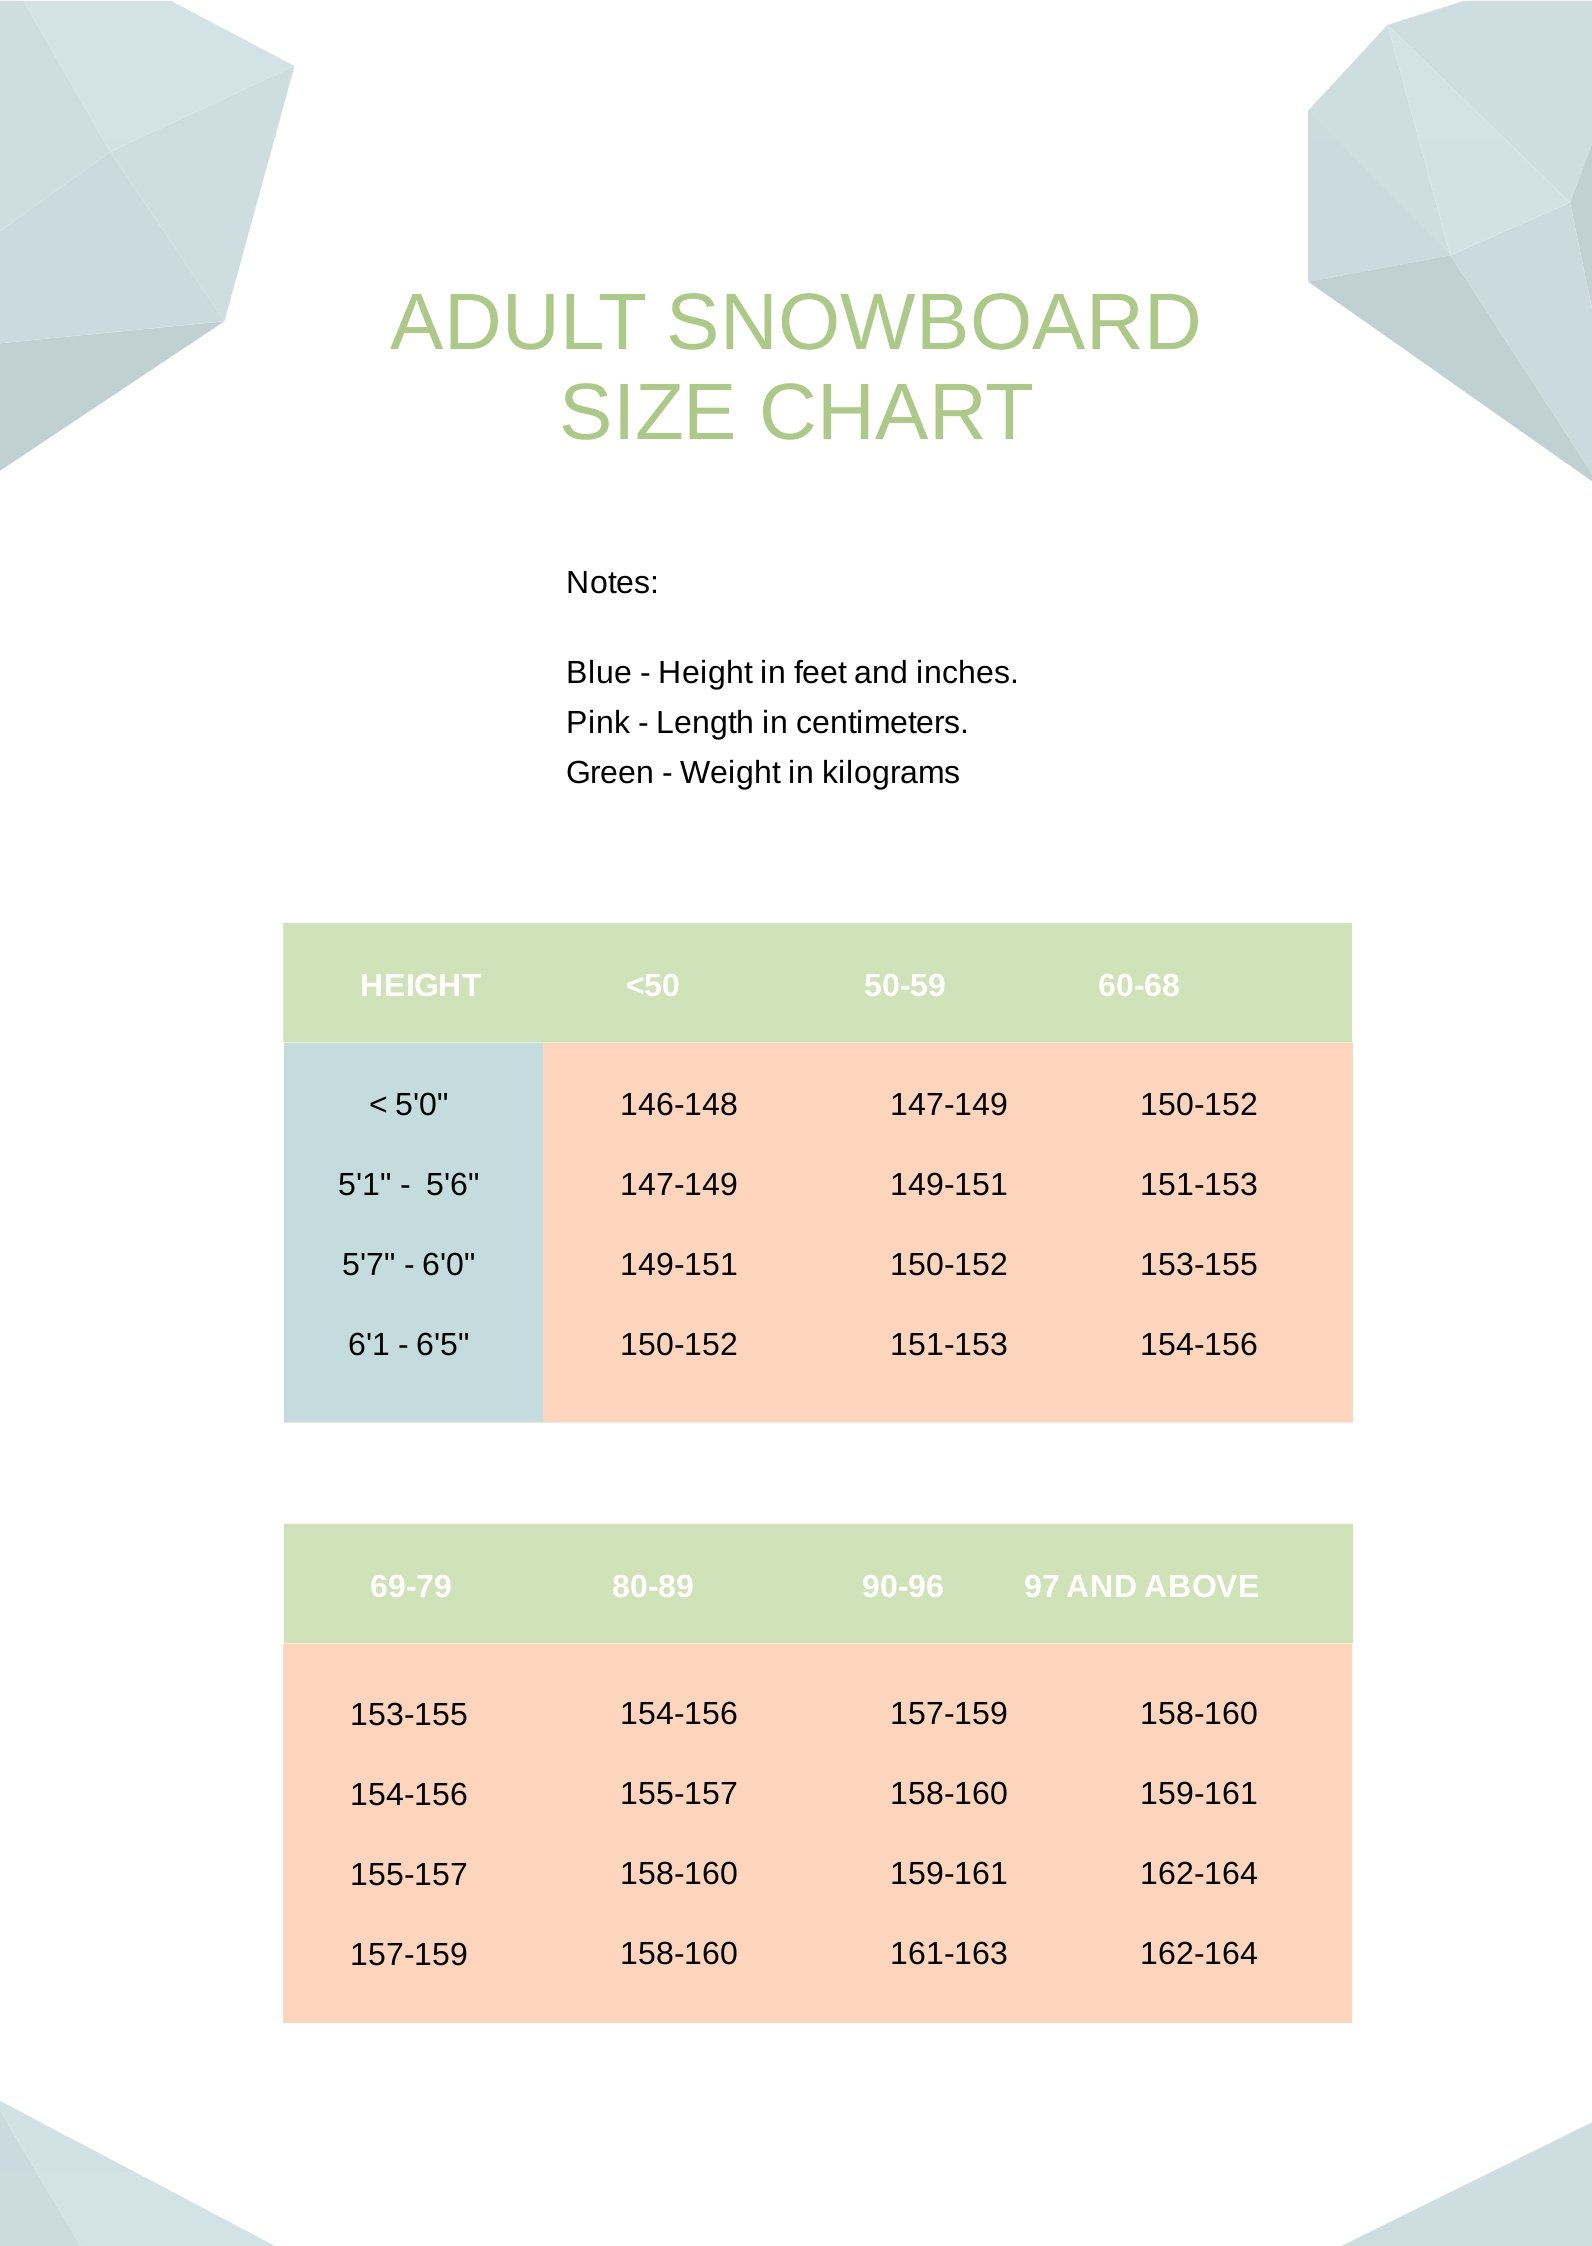 Adult Snowboard Size Chart in PDF